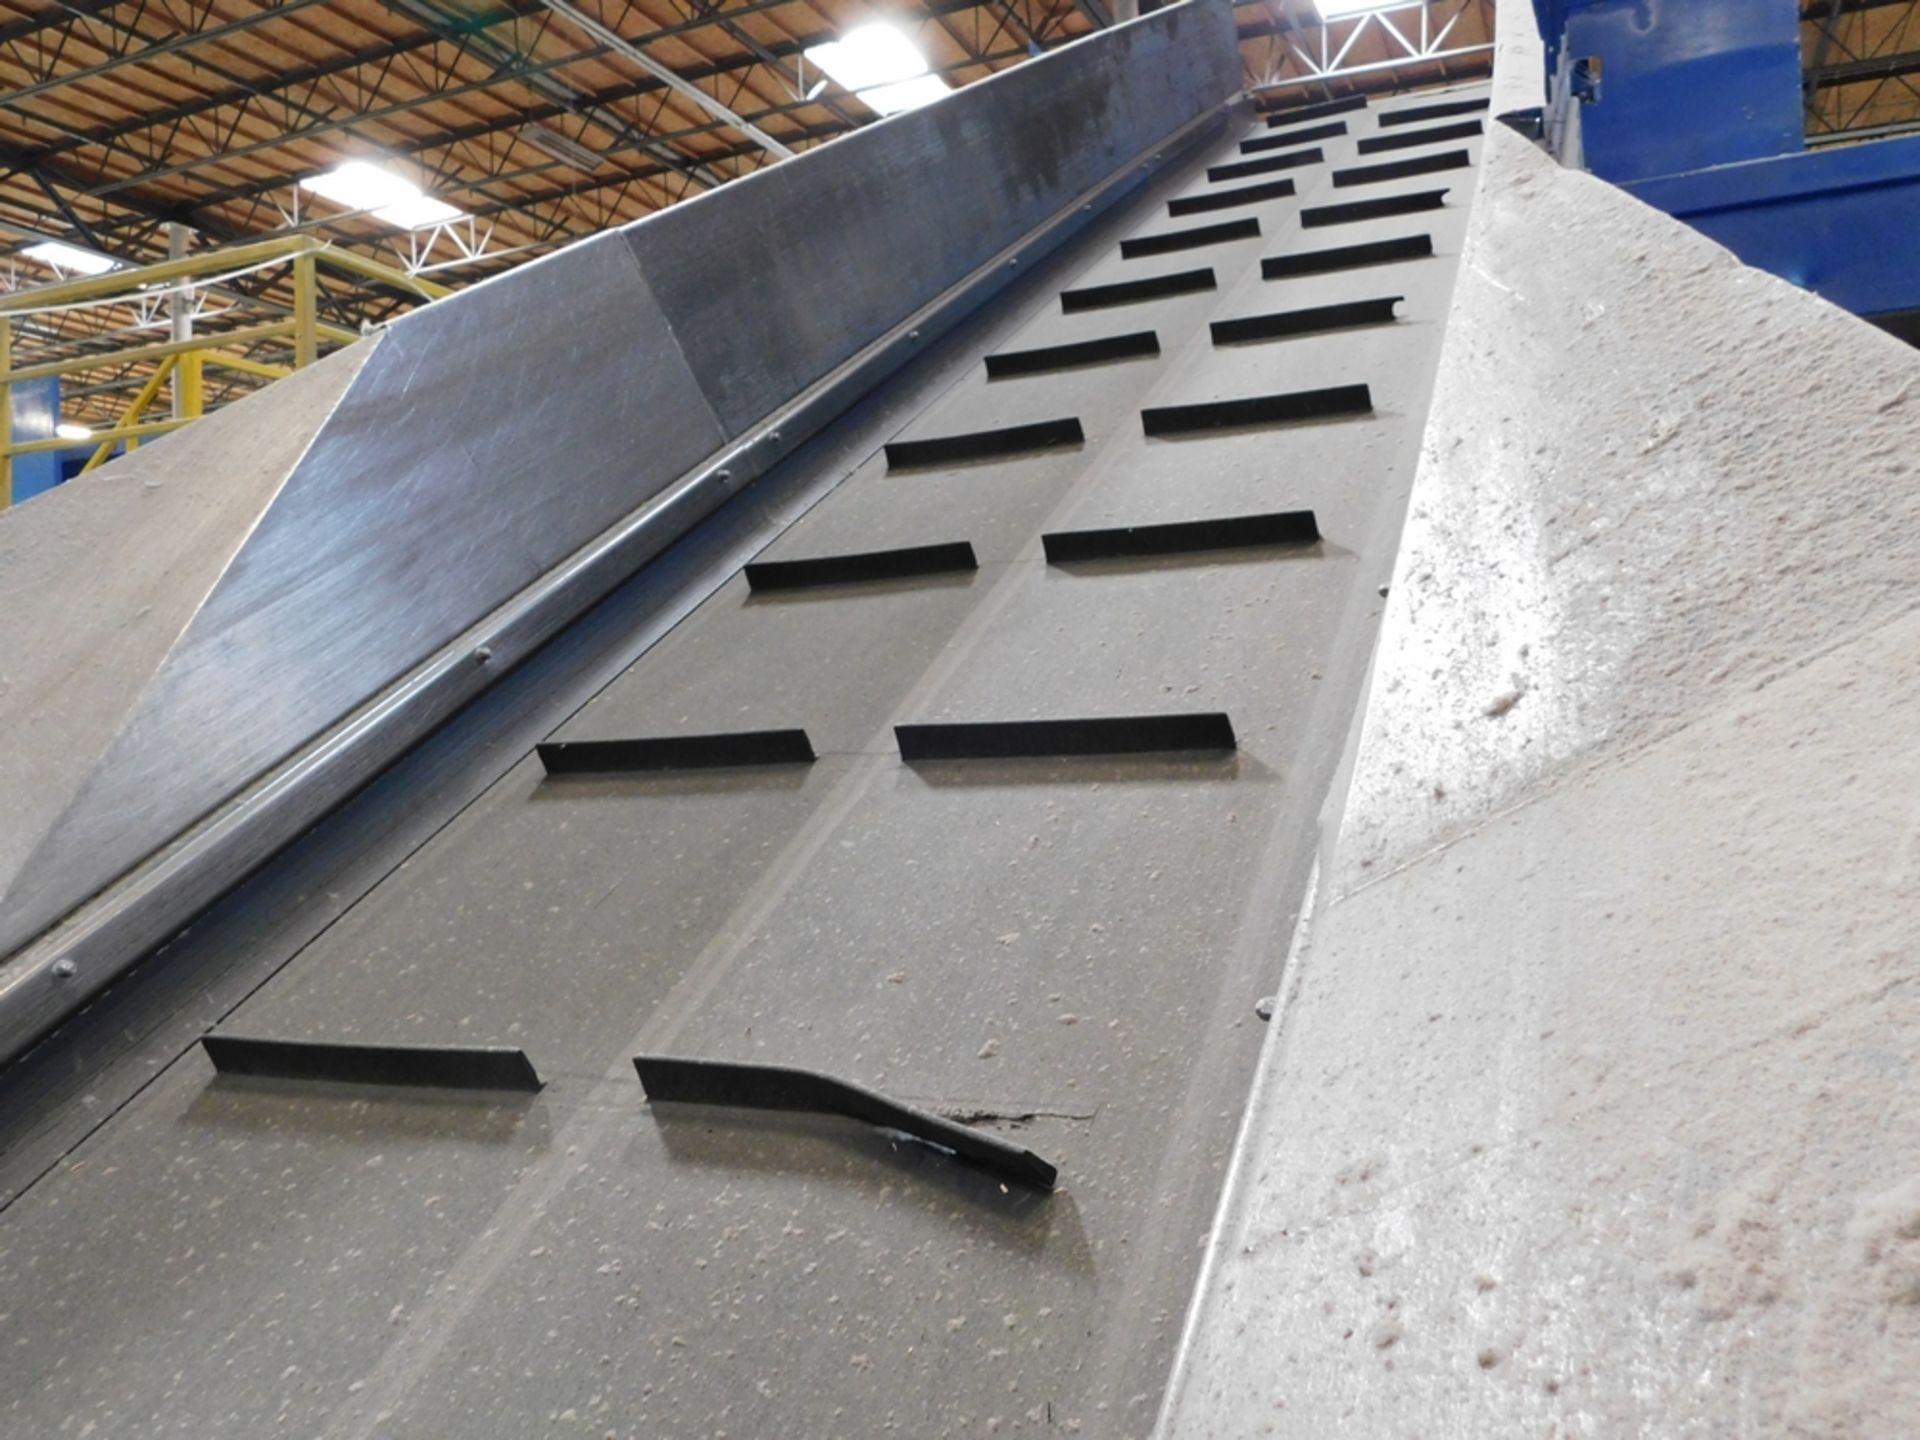 Mayfran 48" x 30' Inclined Rubber Belt Conveyor - Image 2 of 2